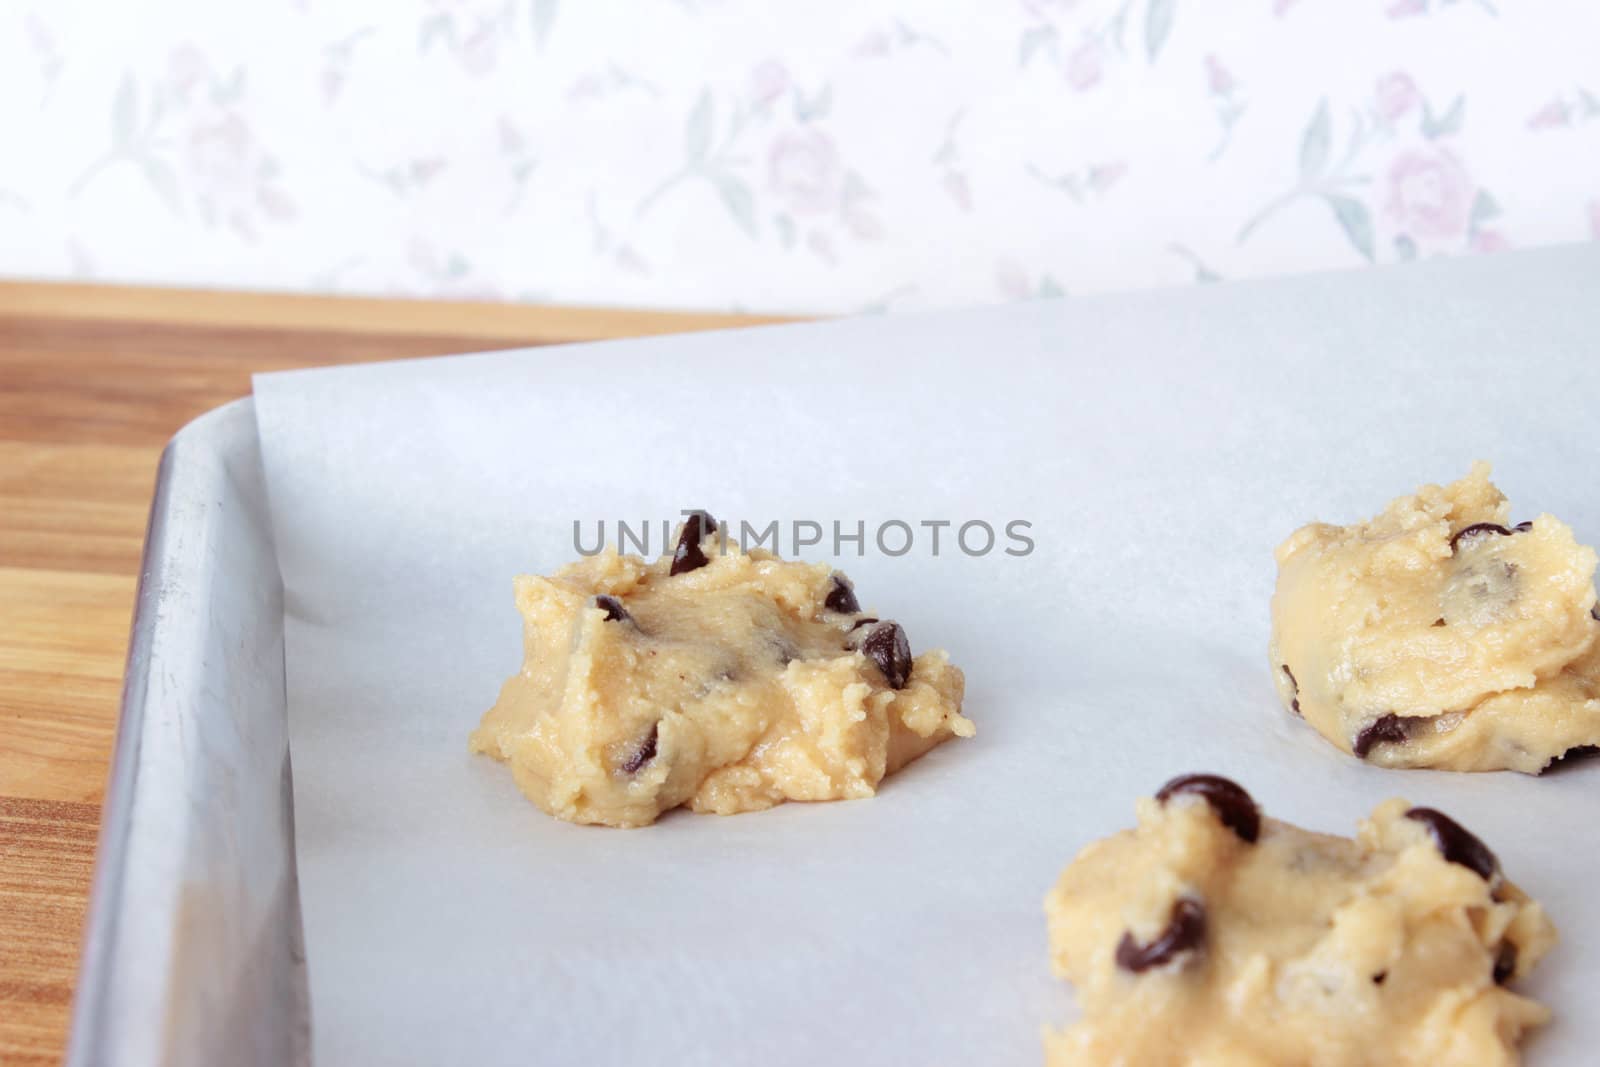 A close-up image of a cookie sheet lined with parchment paper, with chocolate chip cookie dough shaped into cookies, on a wooden counter with a vintage white wallpaper background with pink flowers.